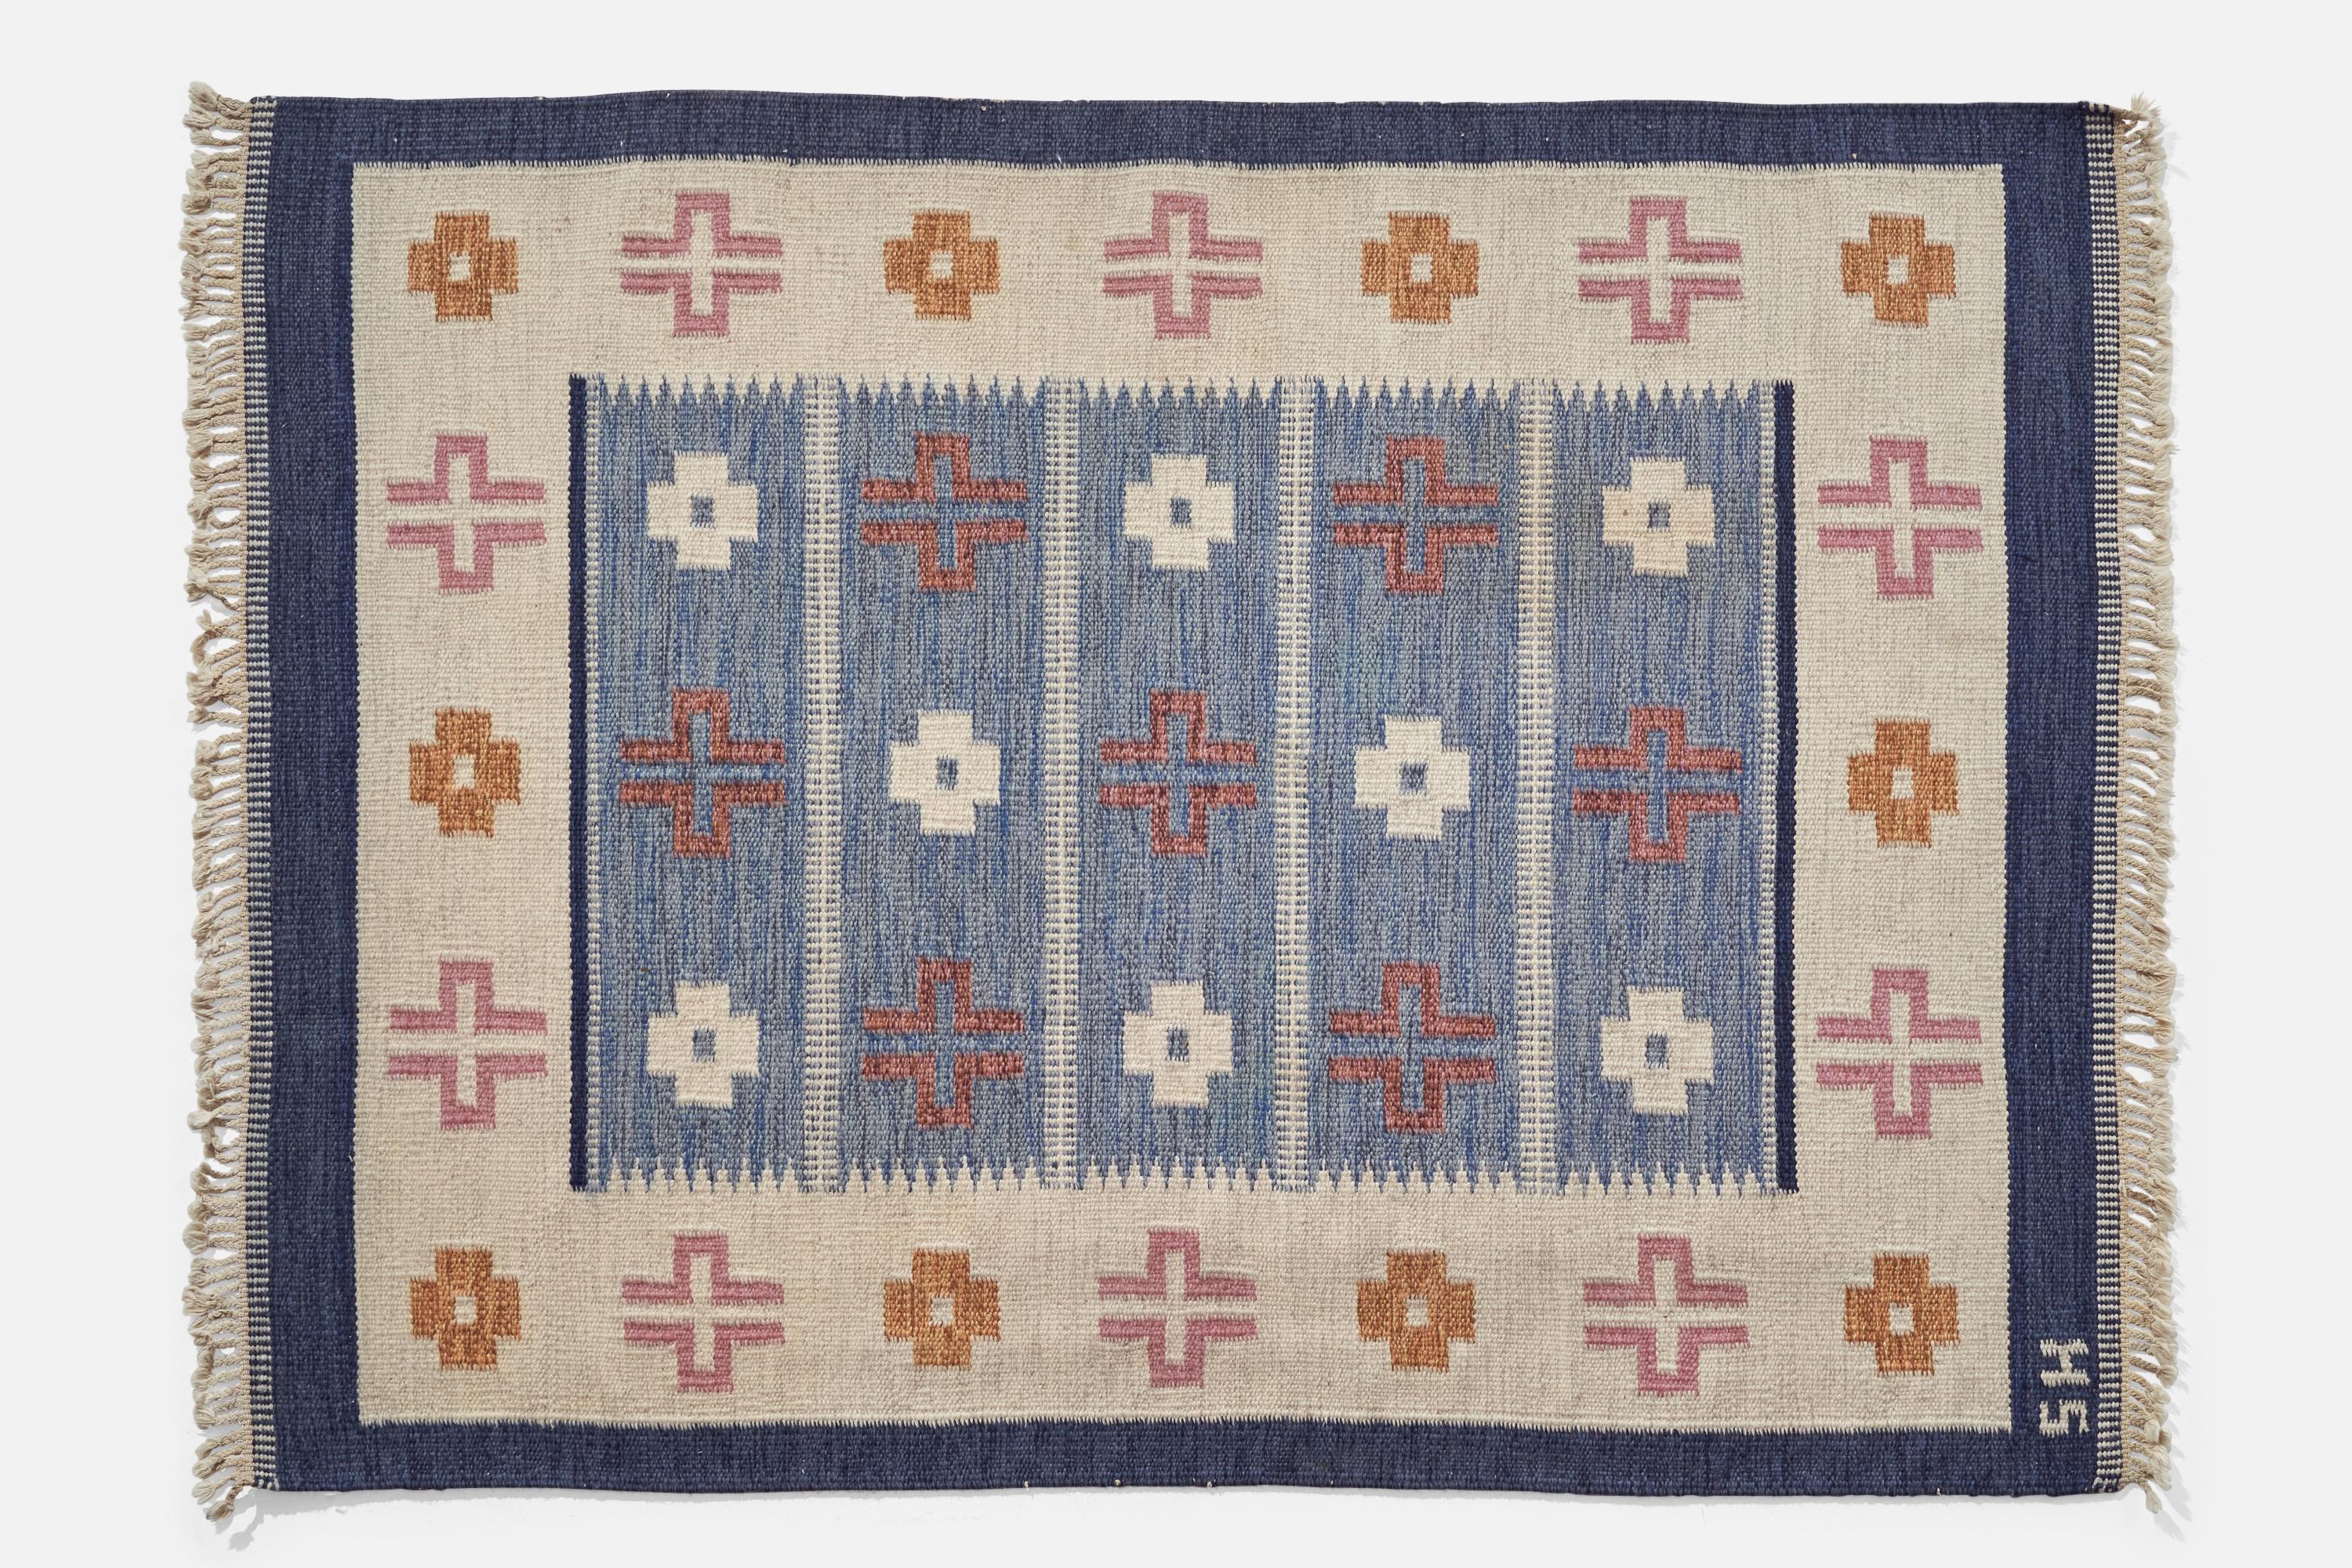 A blue, pink, orange and off-white flat weave wood carpet designed and produced in Sweden, c. 1950s.
 